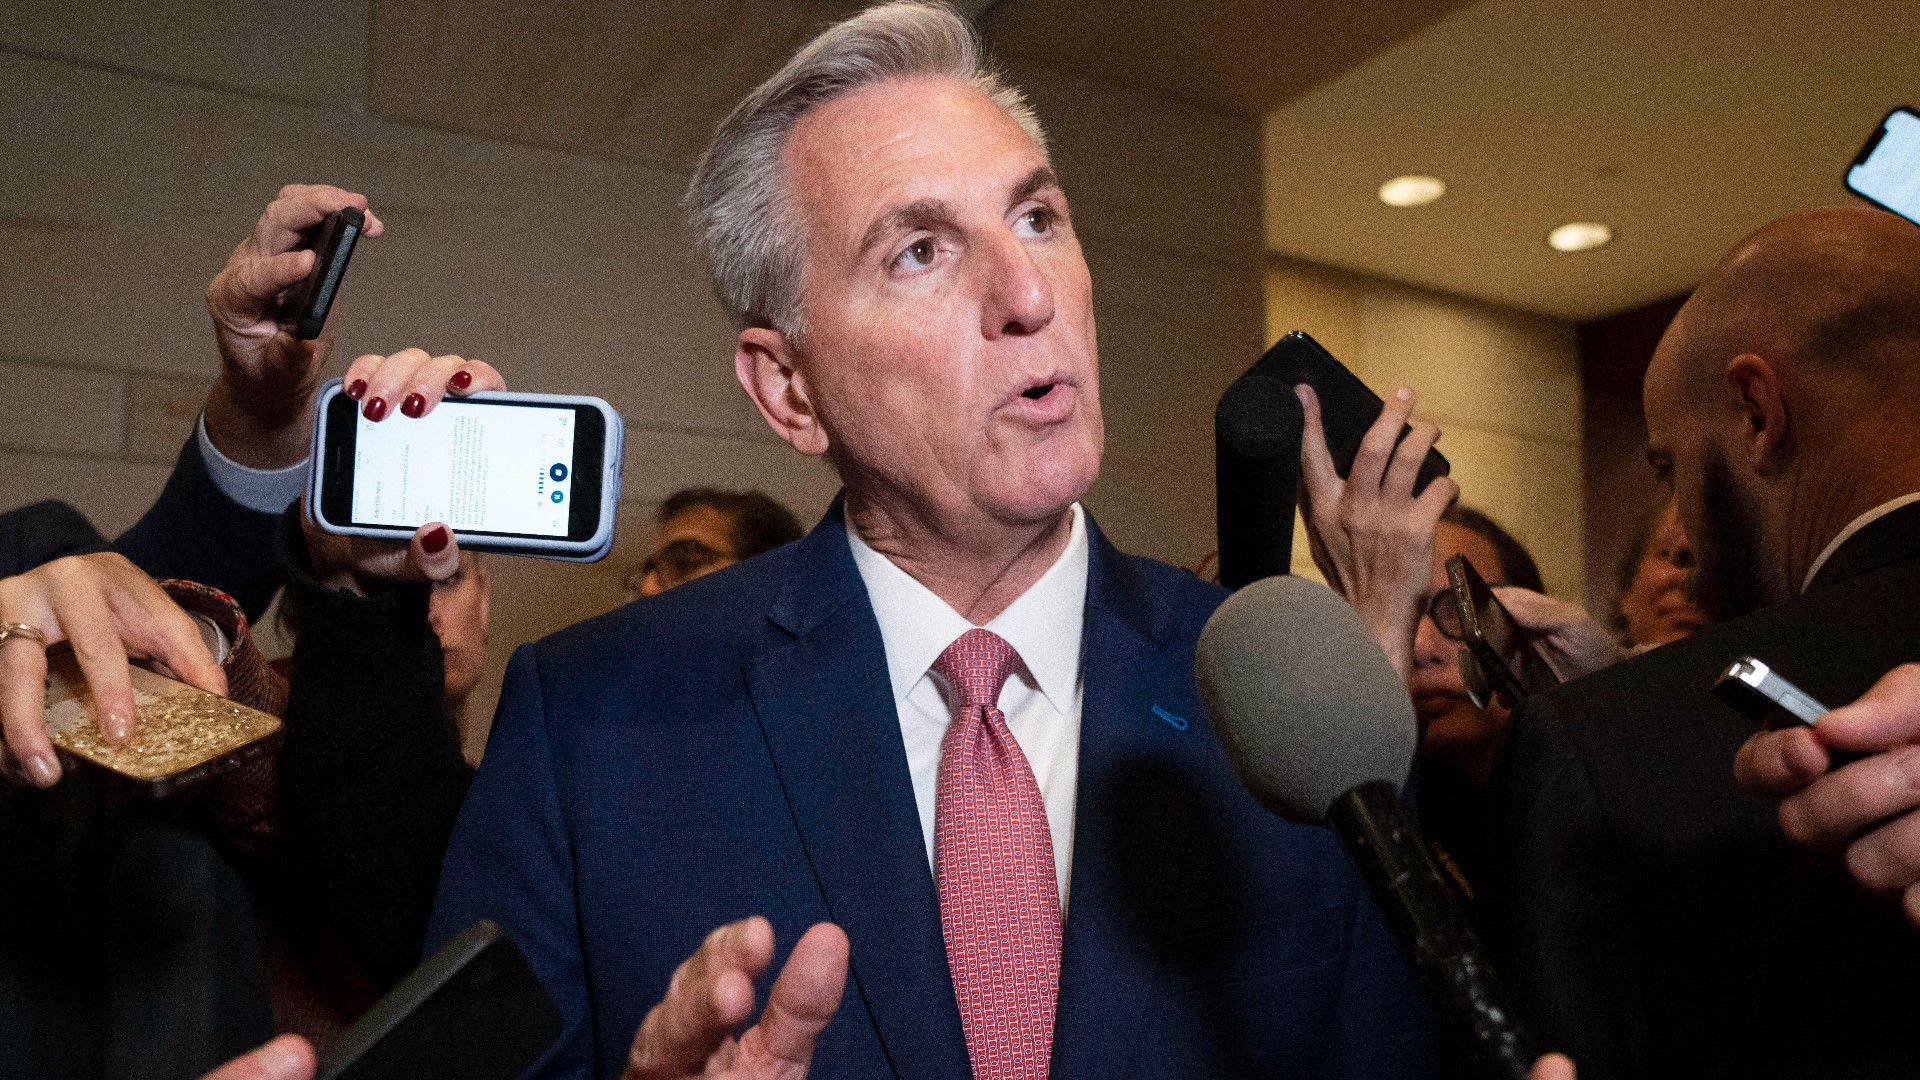 The formal vote for speaker is in January and McCarthy will need to shore up support from no fewer than 218 lawmakers with potentially just a few votes to spare.